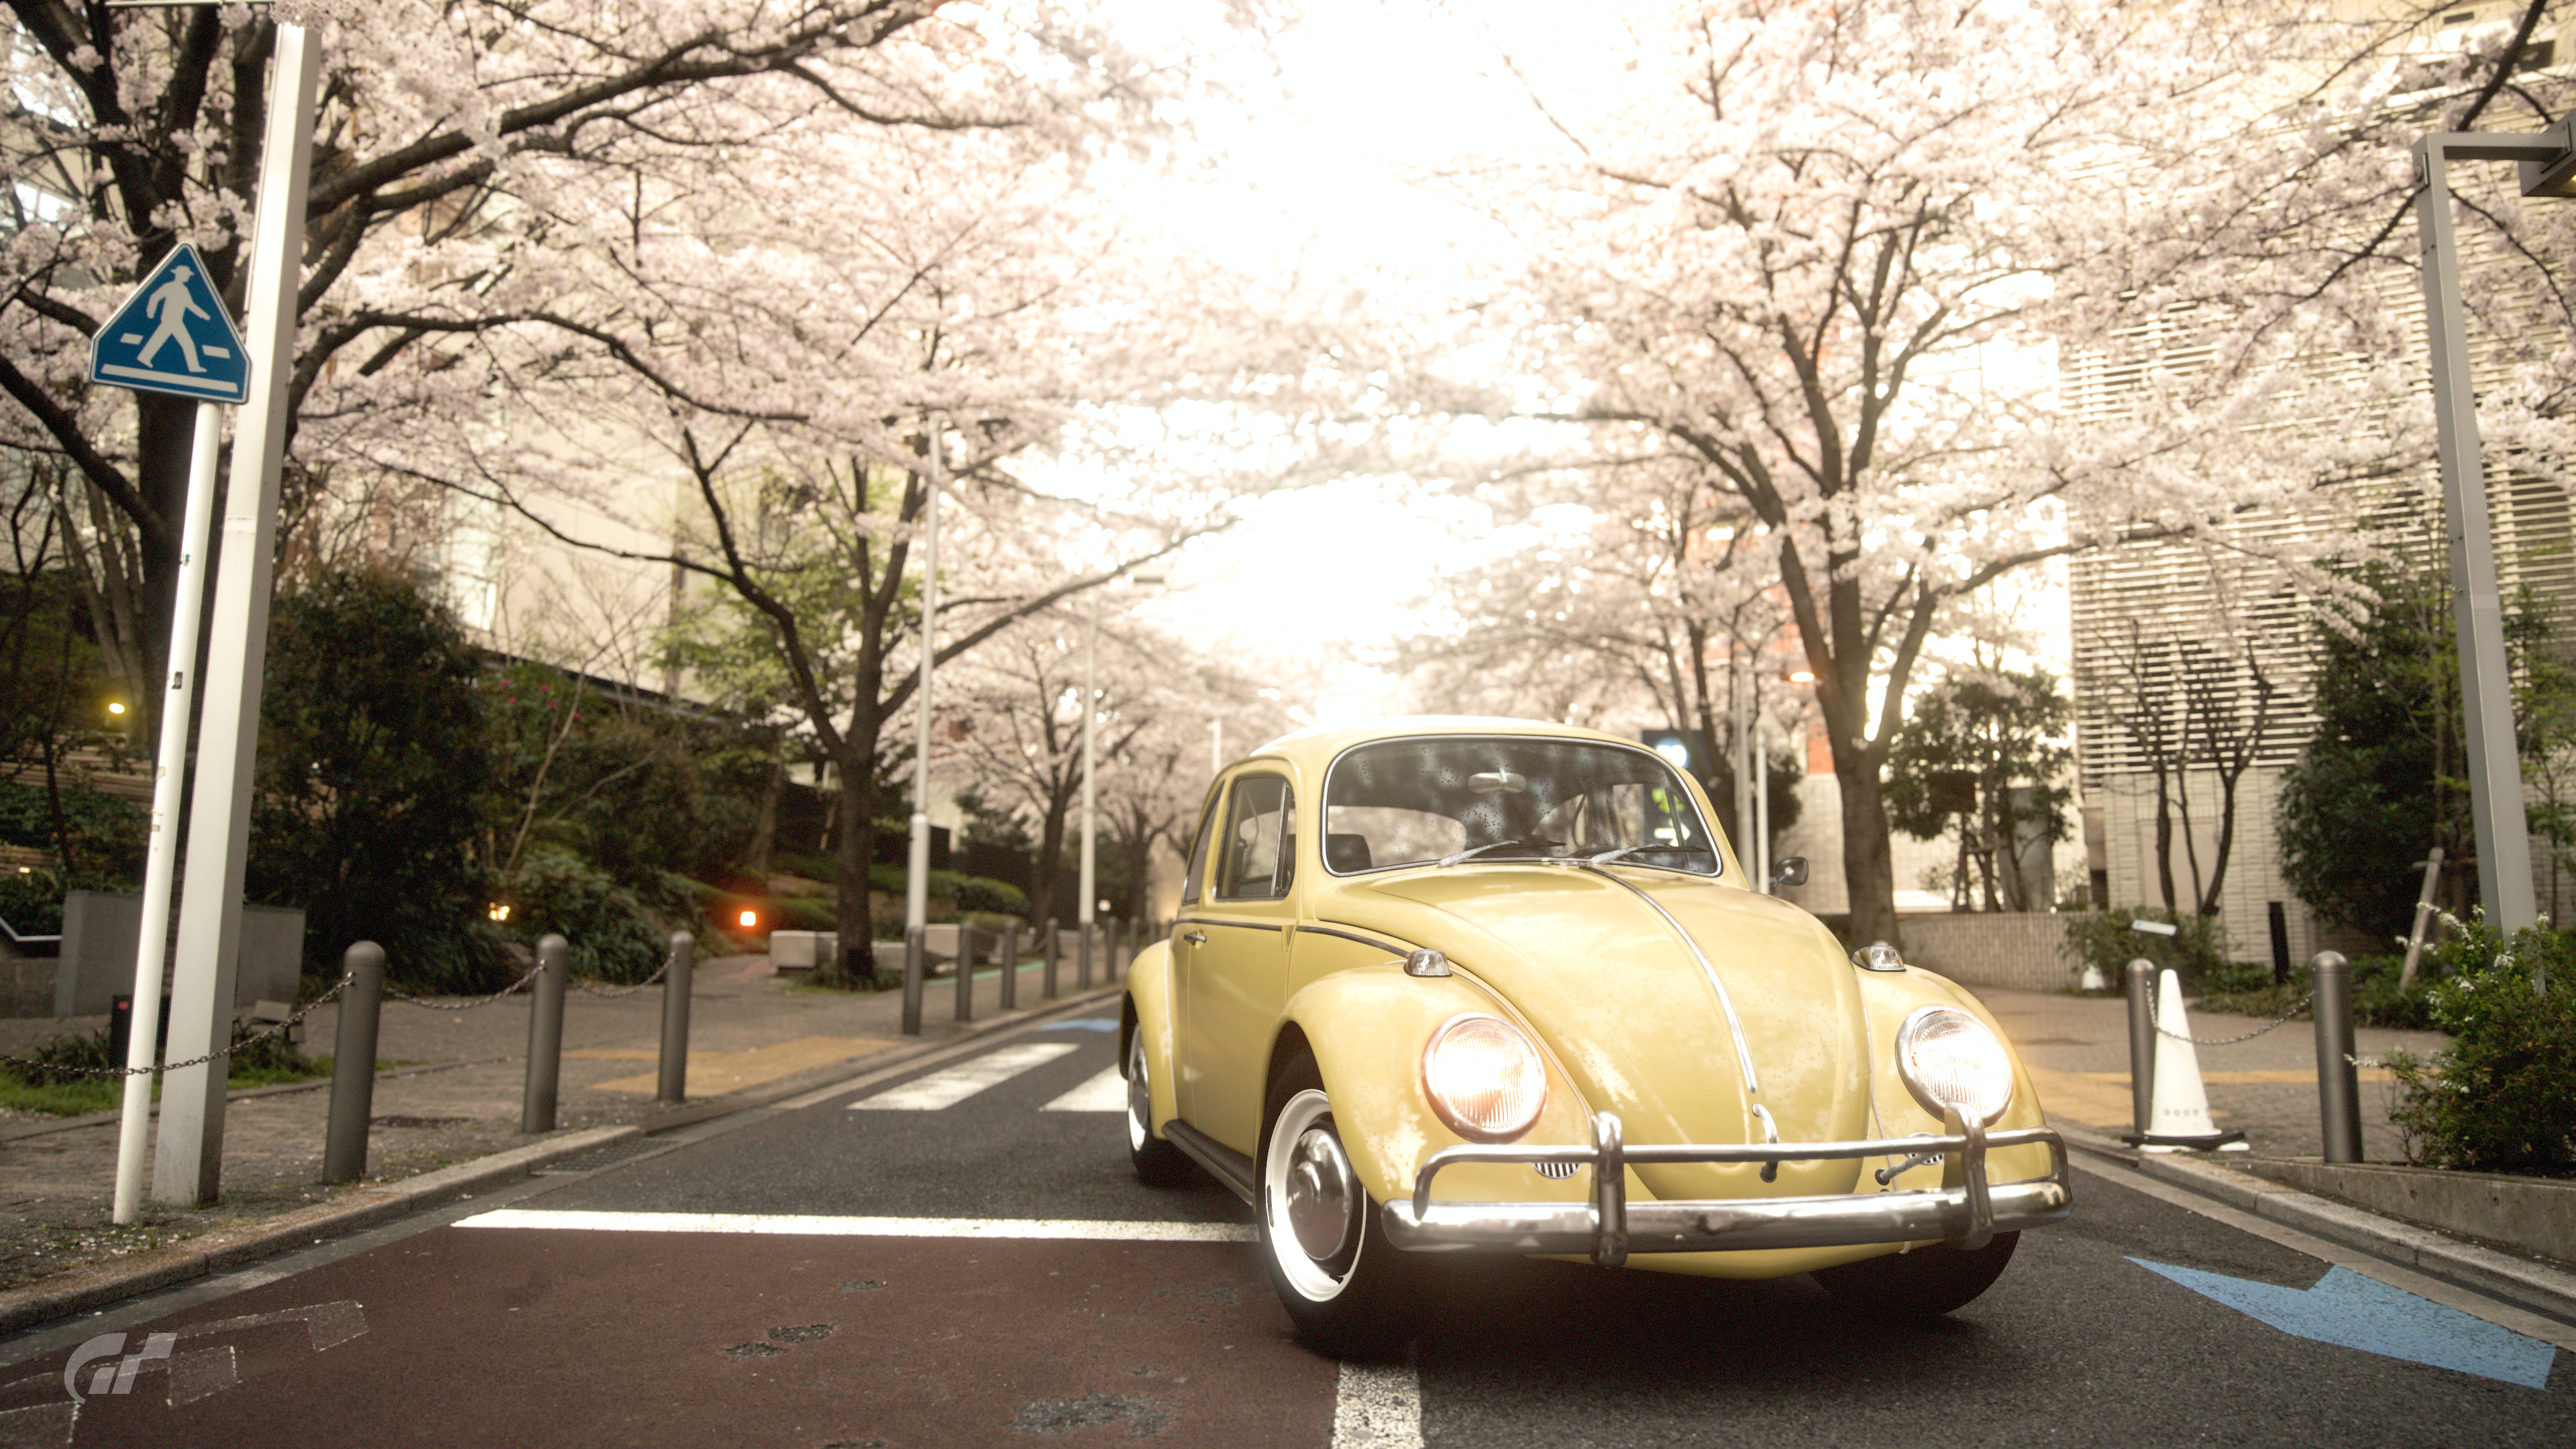 General 3840x2160 nature car vehicle video games Gran Turismo 7 Volkswagen Beetle cherry blossom Japan street frontal view trees road signs